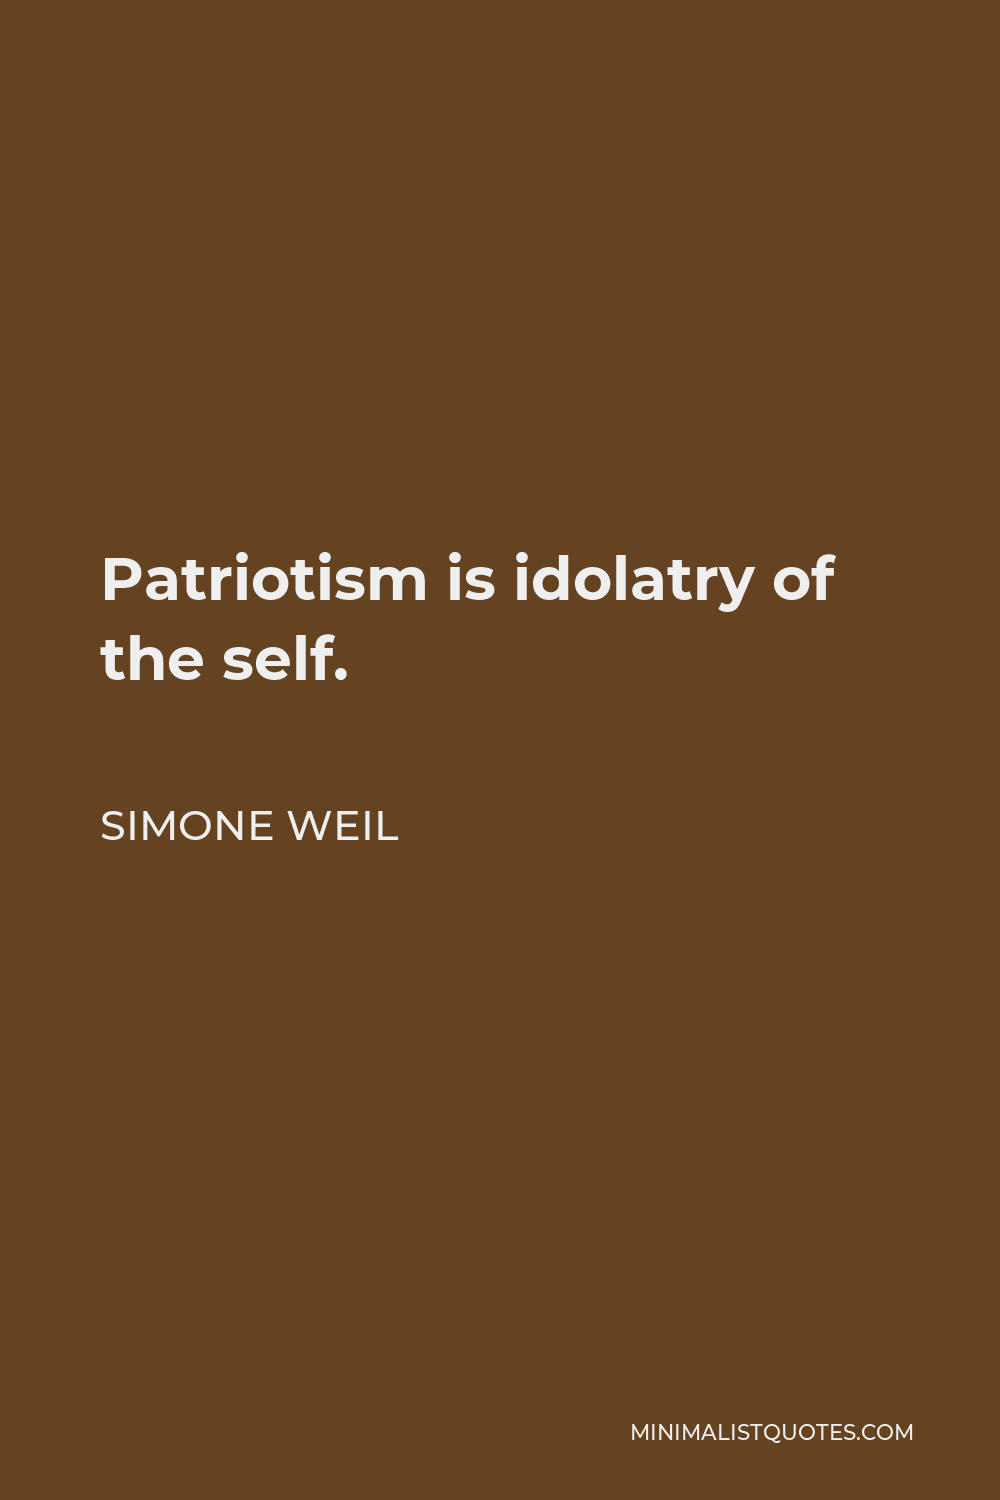 Simone Weil Quote - Patriotism is idolatry of the self.